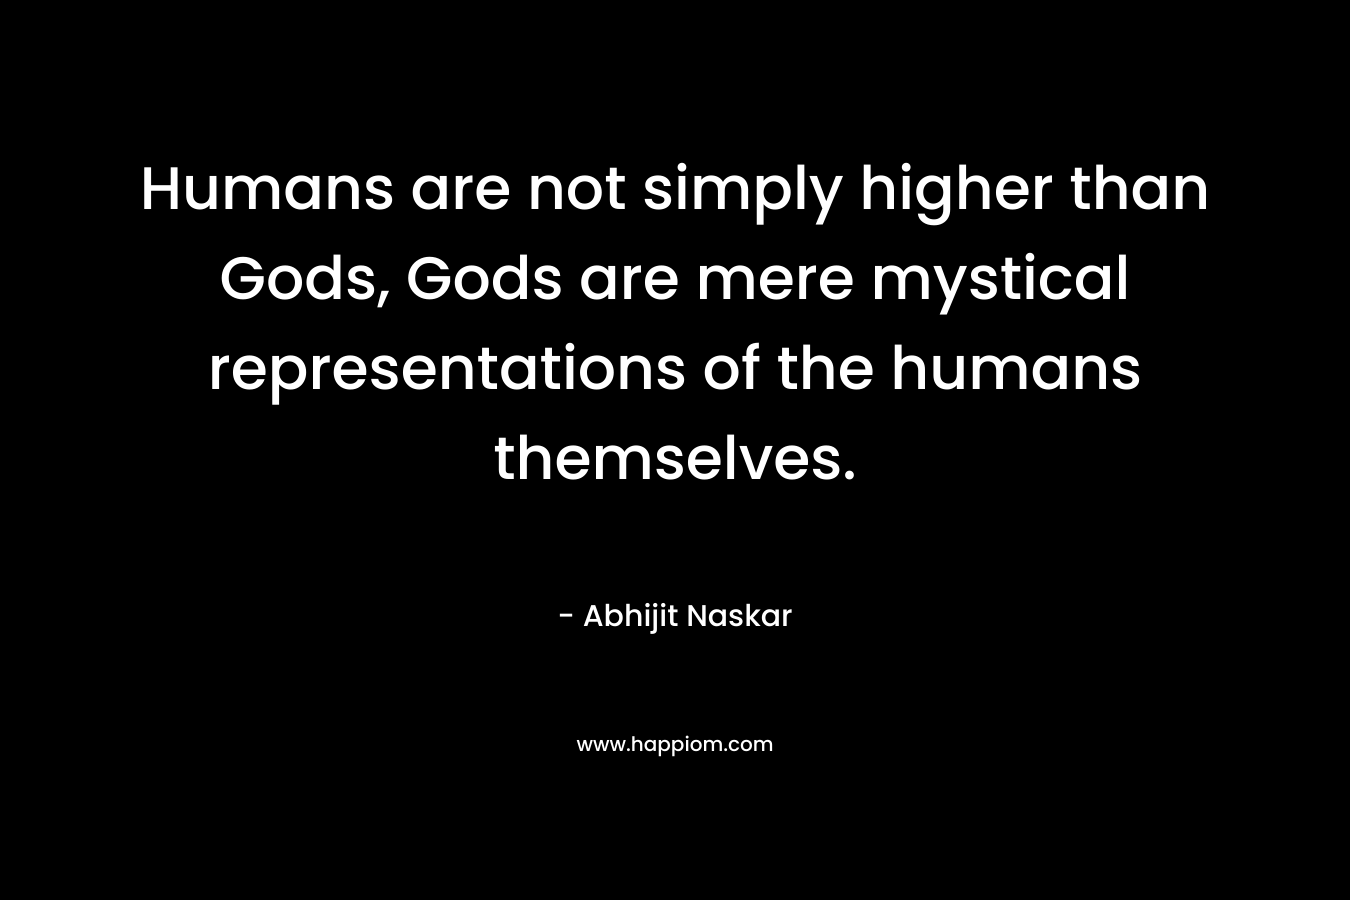 Humans are not simply higher than Gods, Gods are mere mystical representations of the humans themselves.